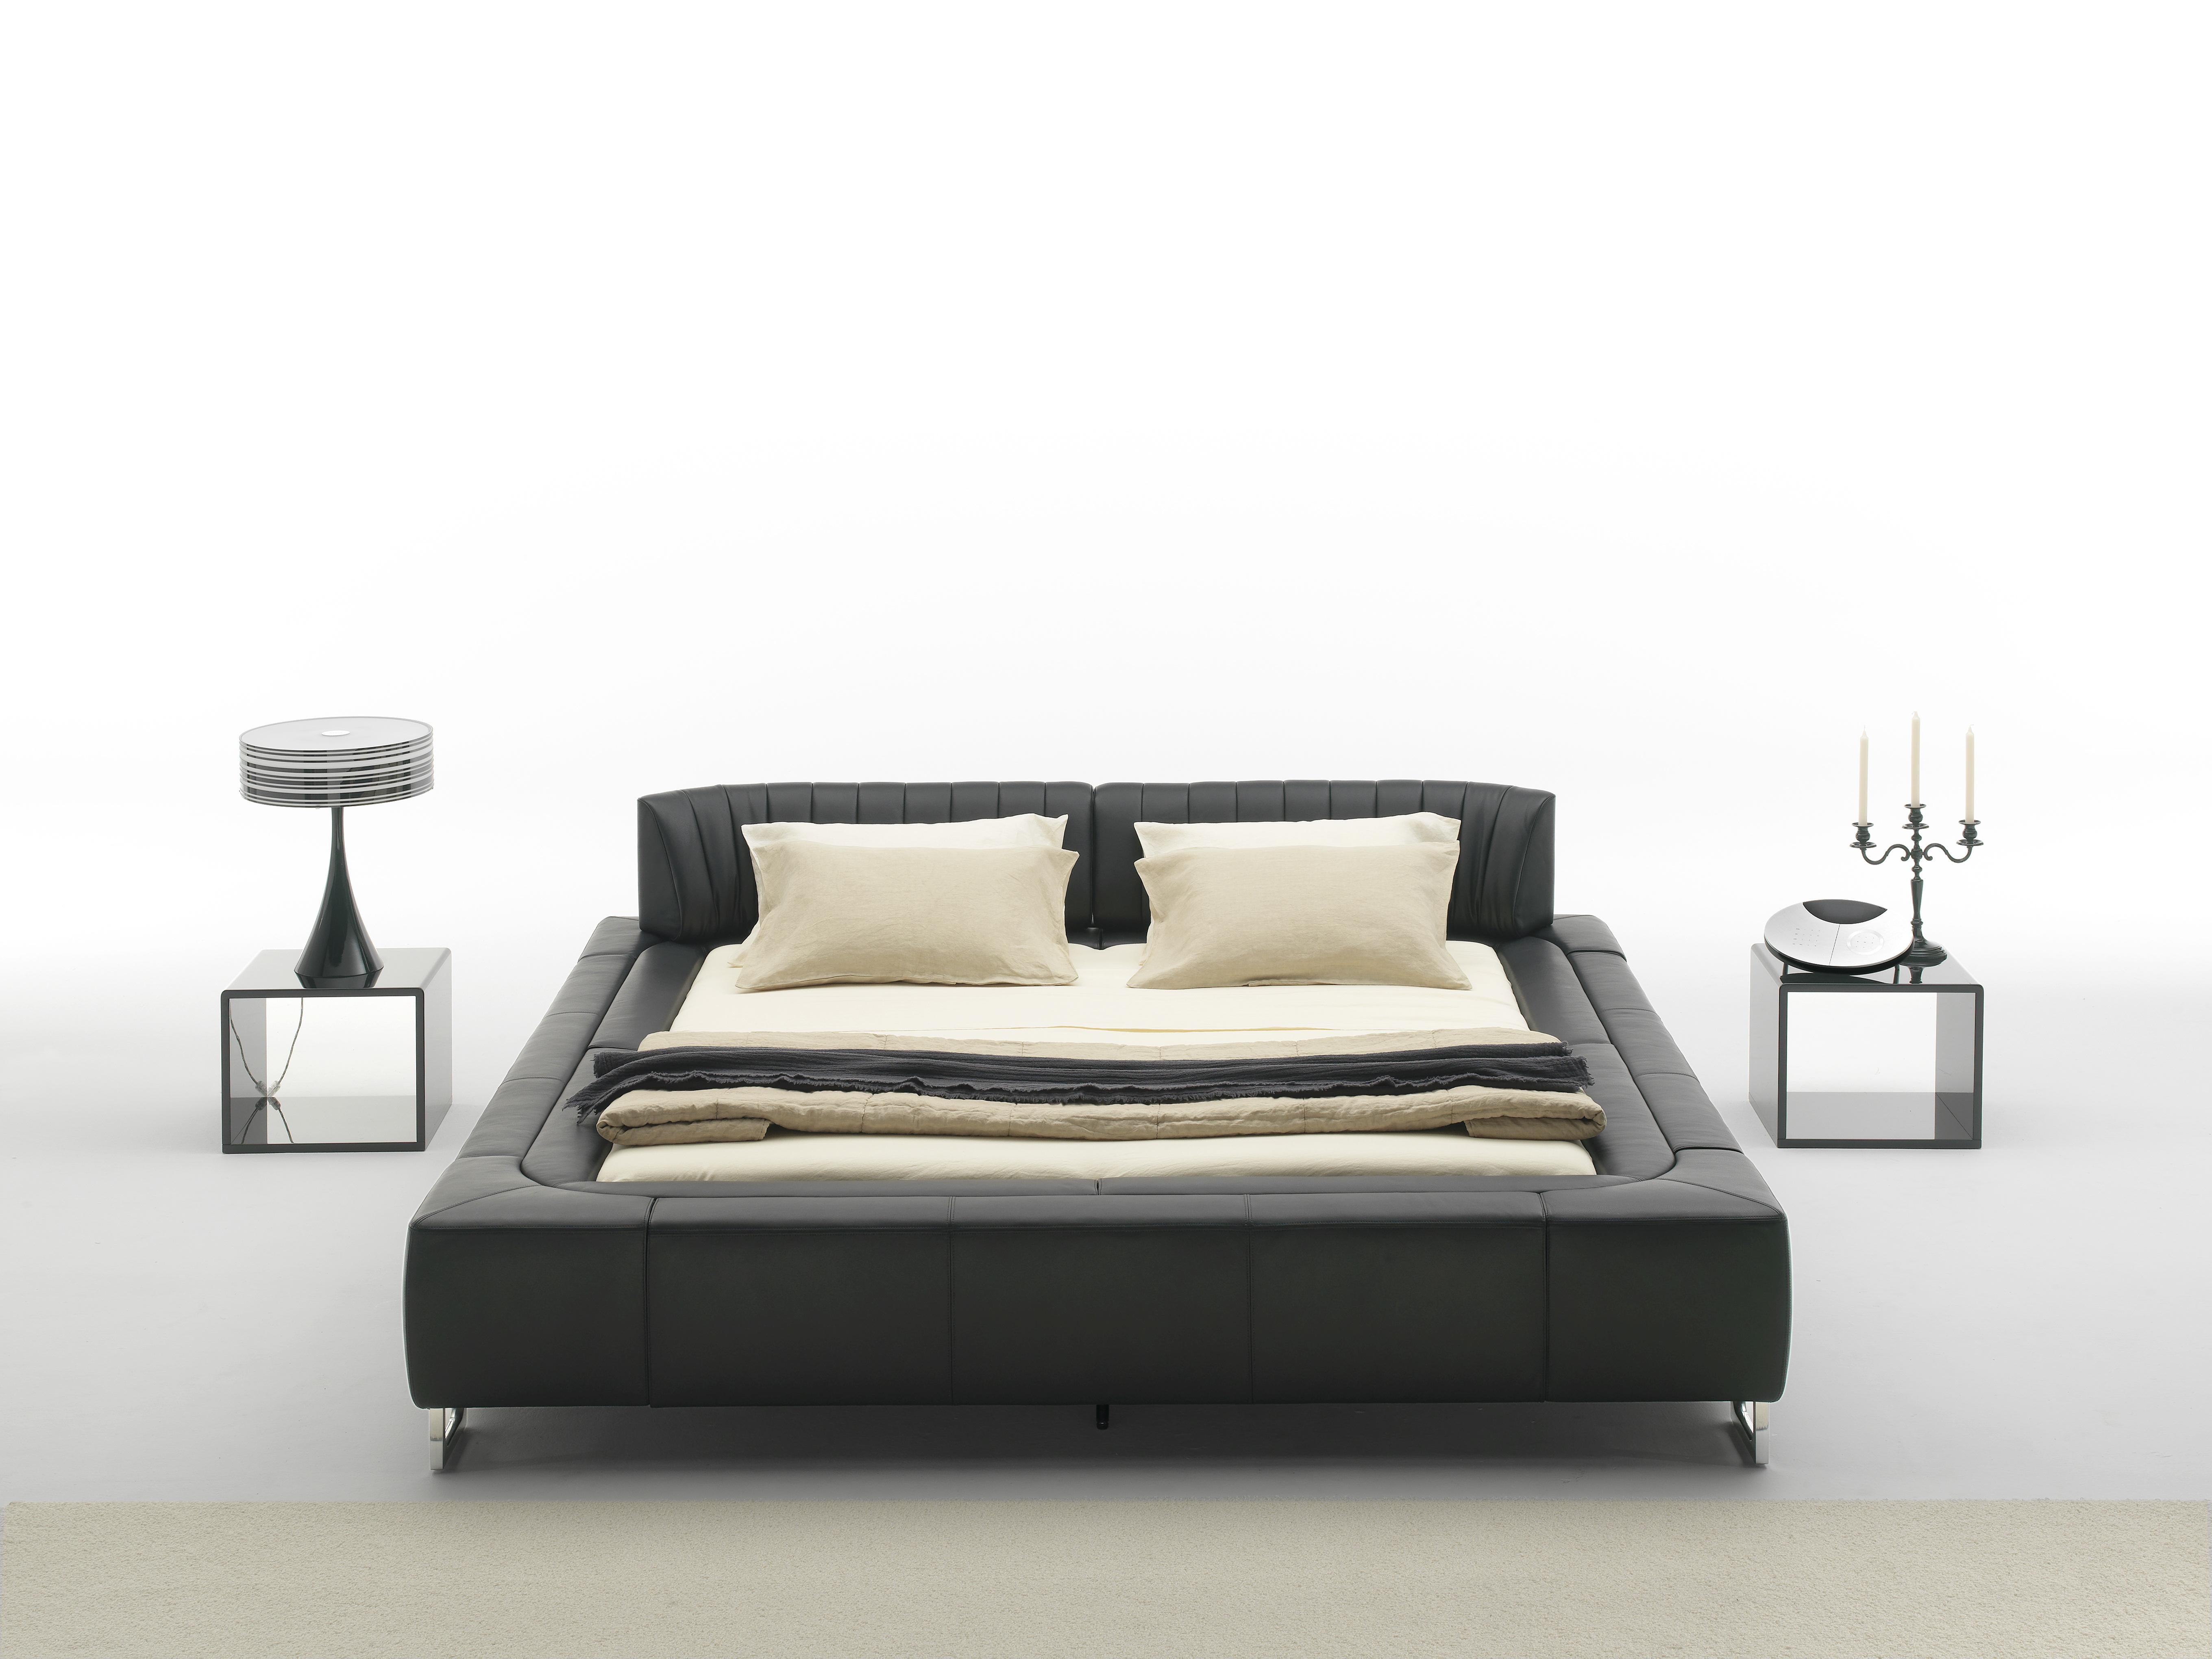 DS-1165 bed by De Sede
Dimensions: D 262 x W 222 x H 47 cm
Materials: metal construction, leather

Prices may change according to the chosen materials and size. 

Playful design for sensual moments

Backrests can be easily and quickly moved